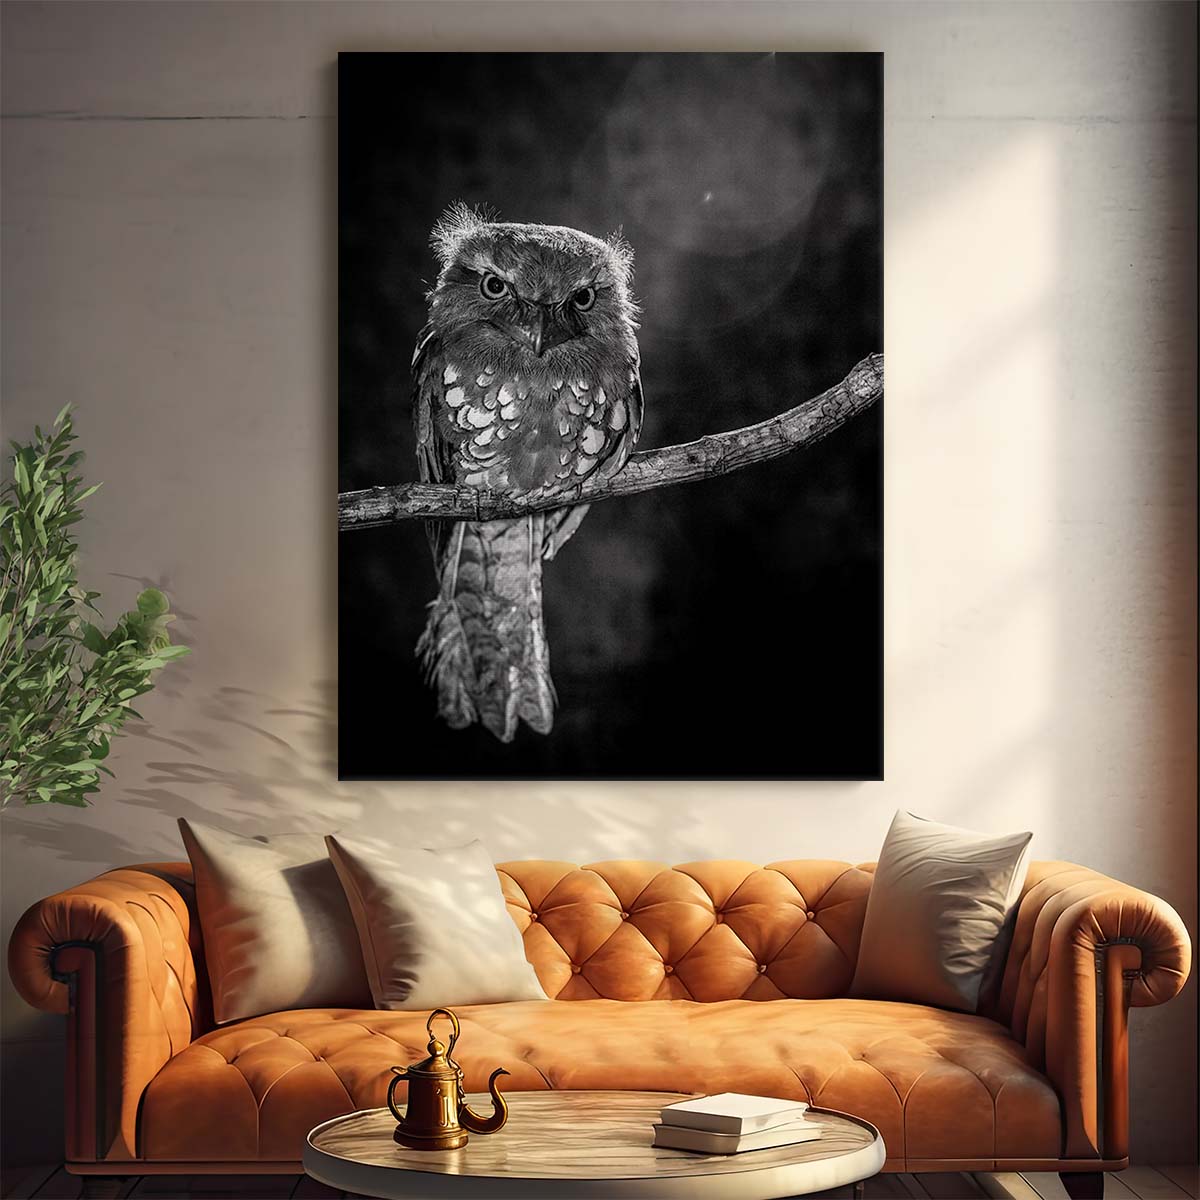 Monochrome Night Owl Photography Cute Baby Wildlife on Branch by Luxuriance Designs, made in USA